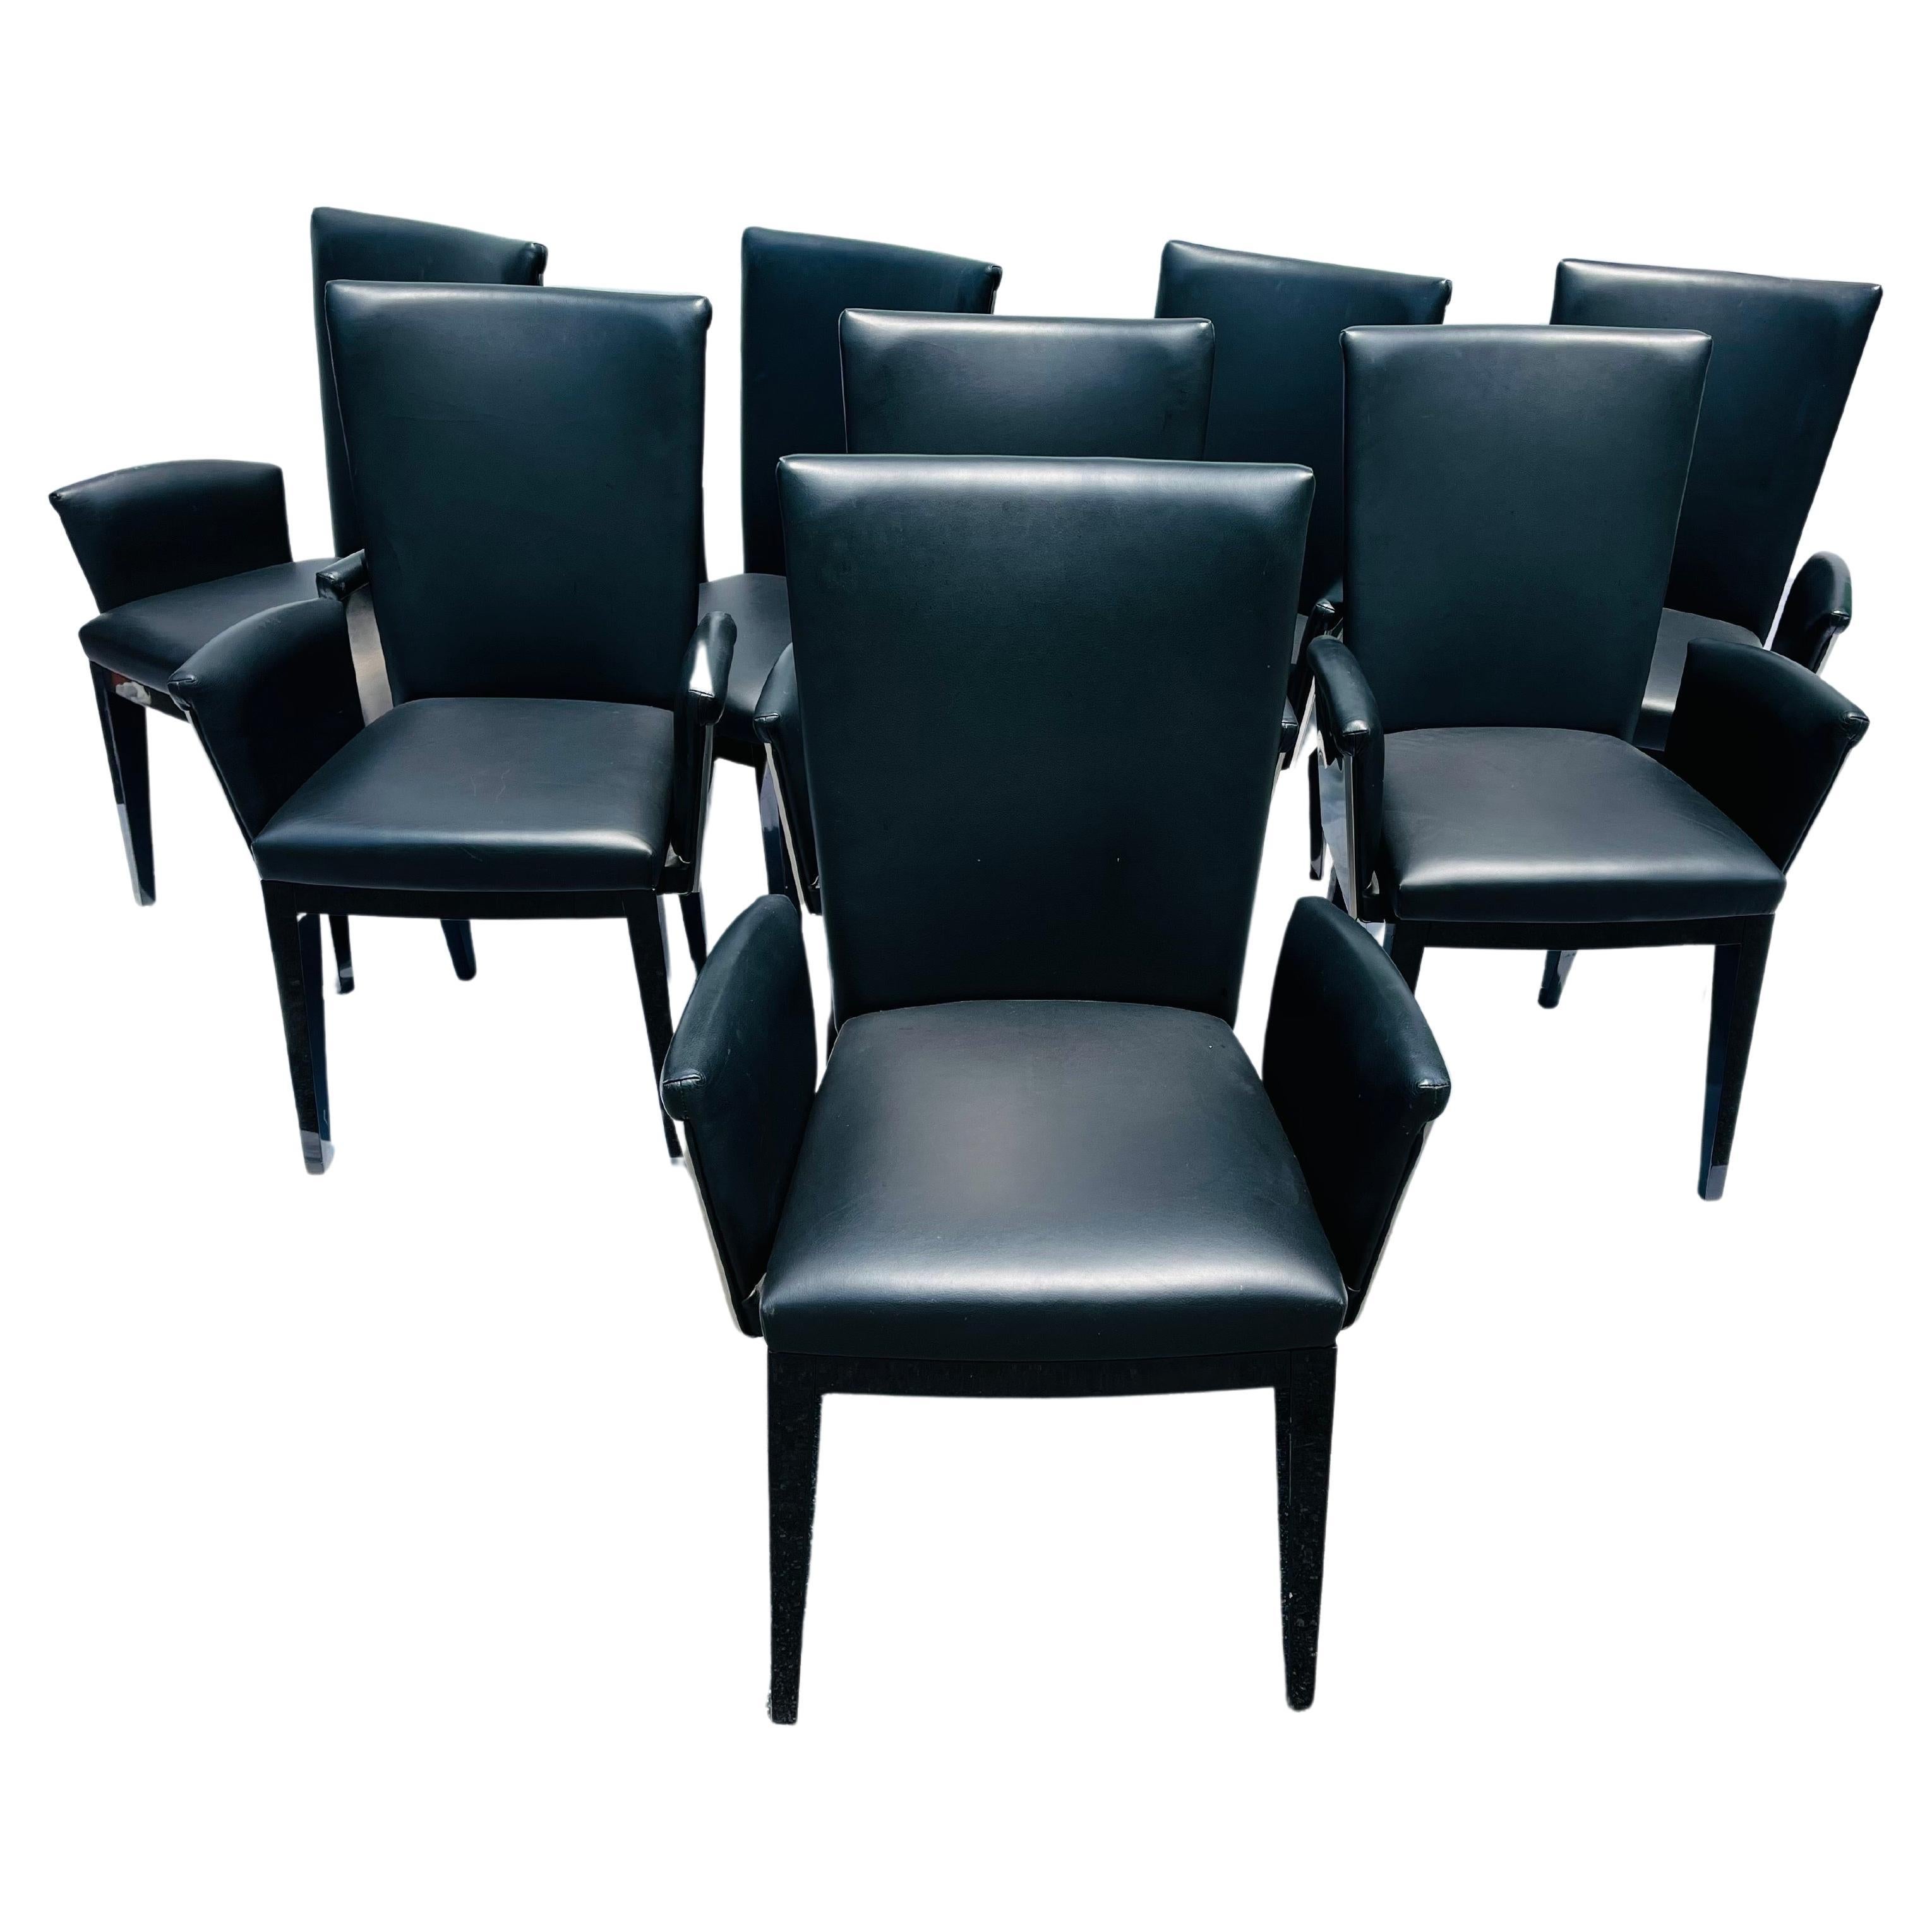 Set of Eight Italian Modern Dining Arm Chairs in Leather Stainless Steel Wood 